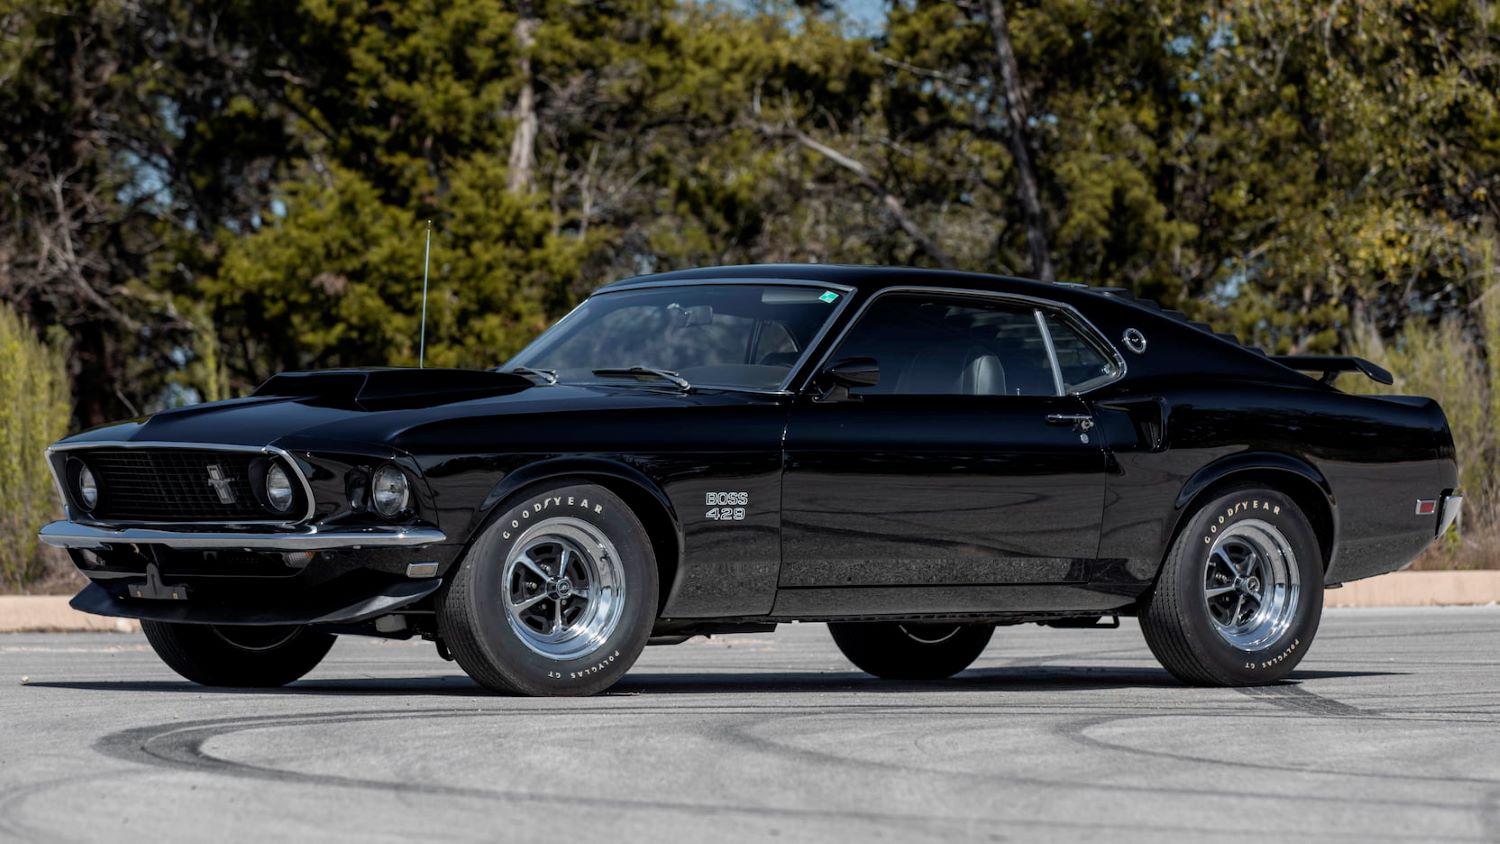 Paul 1969 Ford Mustang Headed To Auction